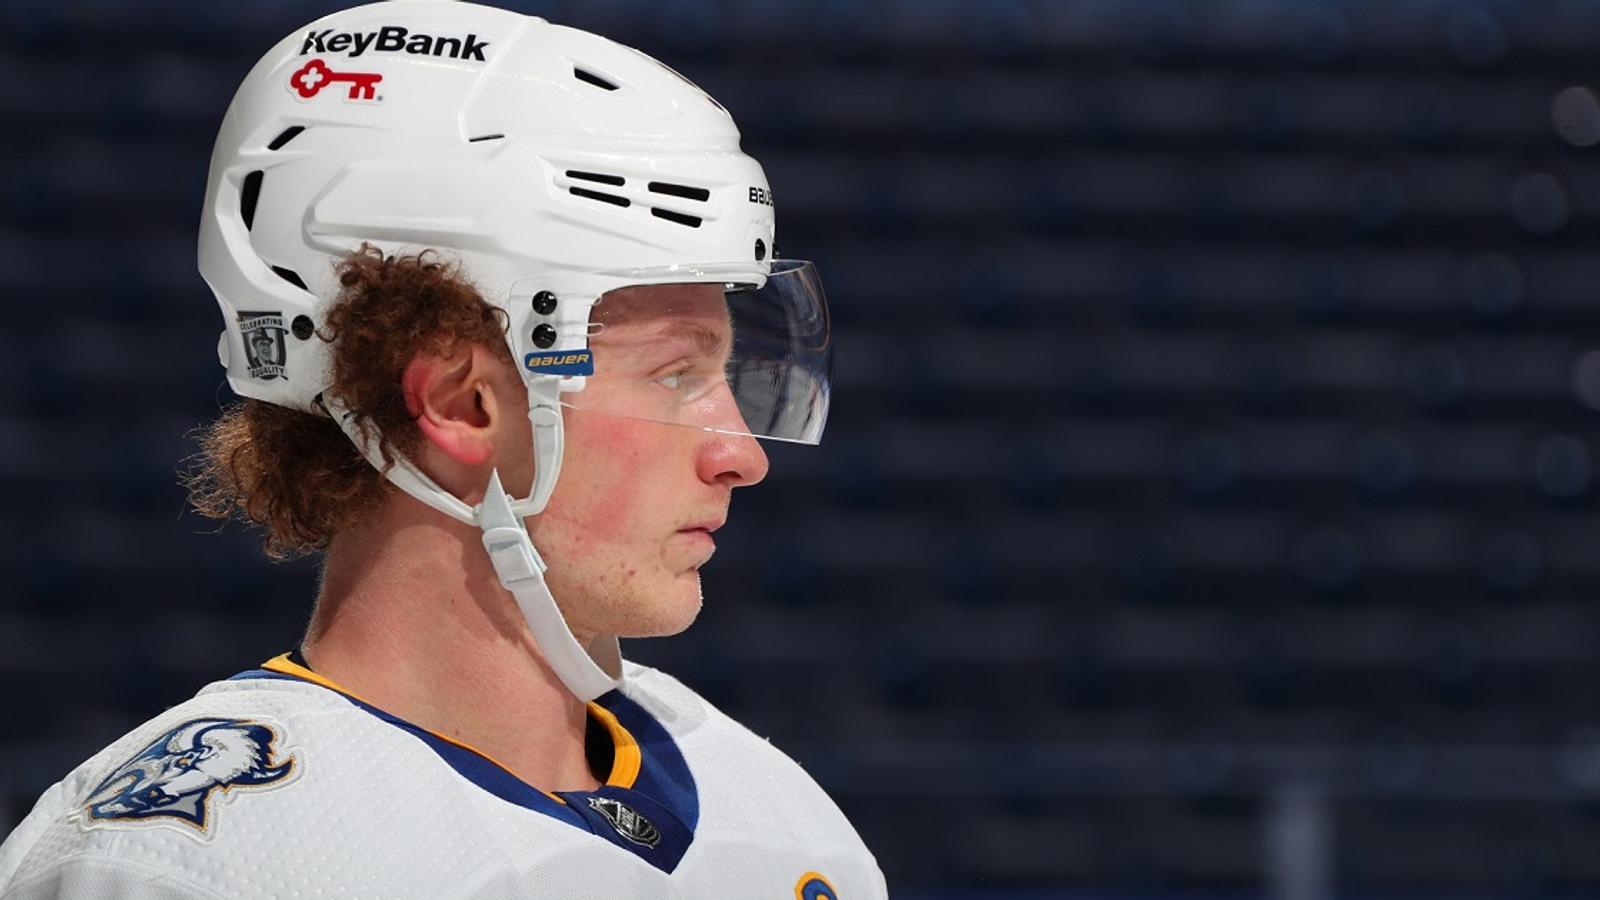 Rumor: “Conditional clauses” may be key to trading Jack Eichel.